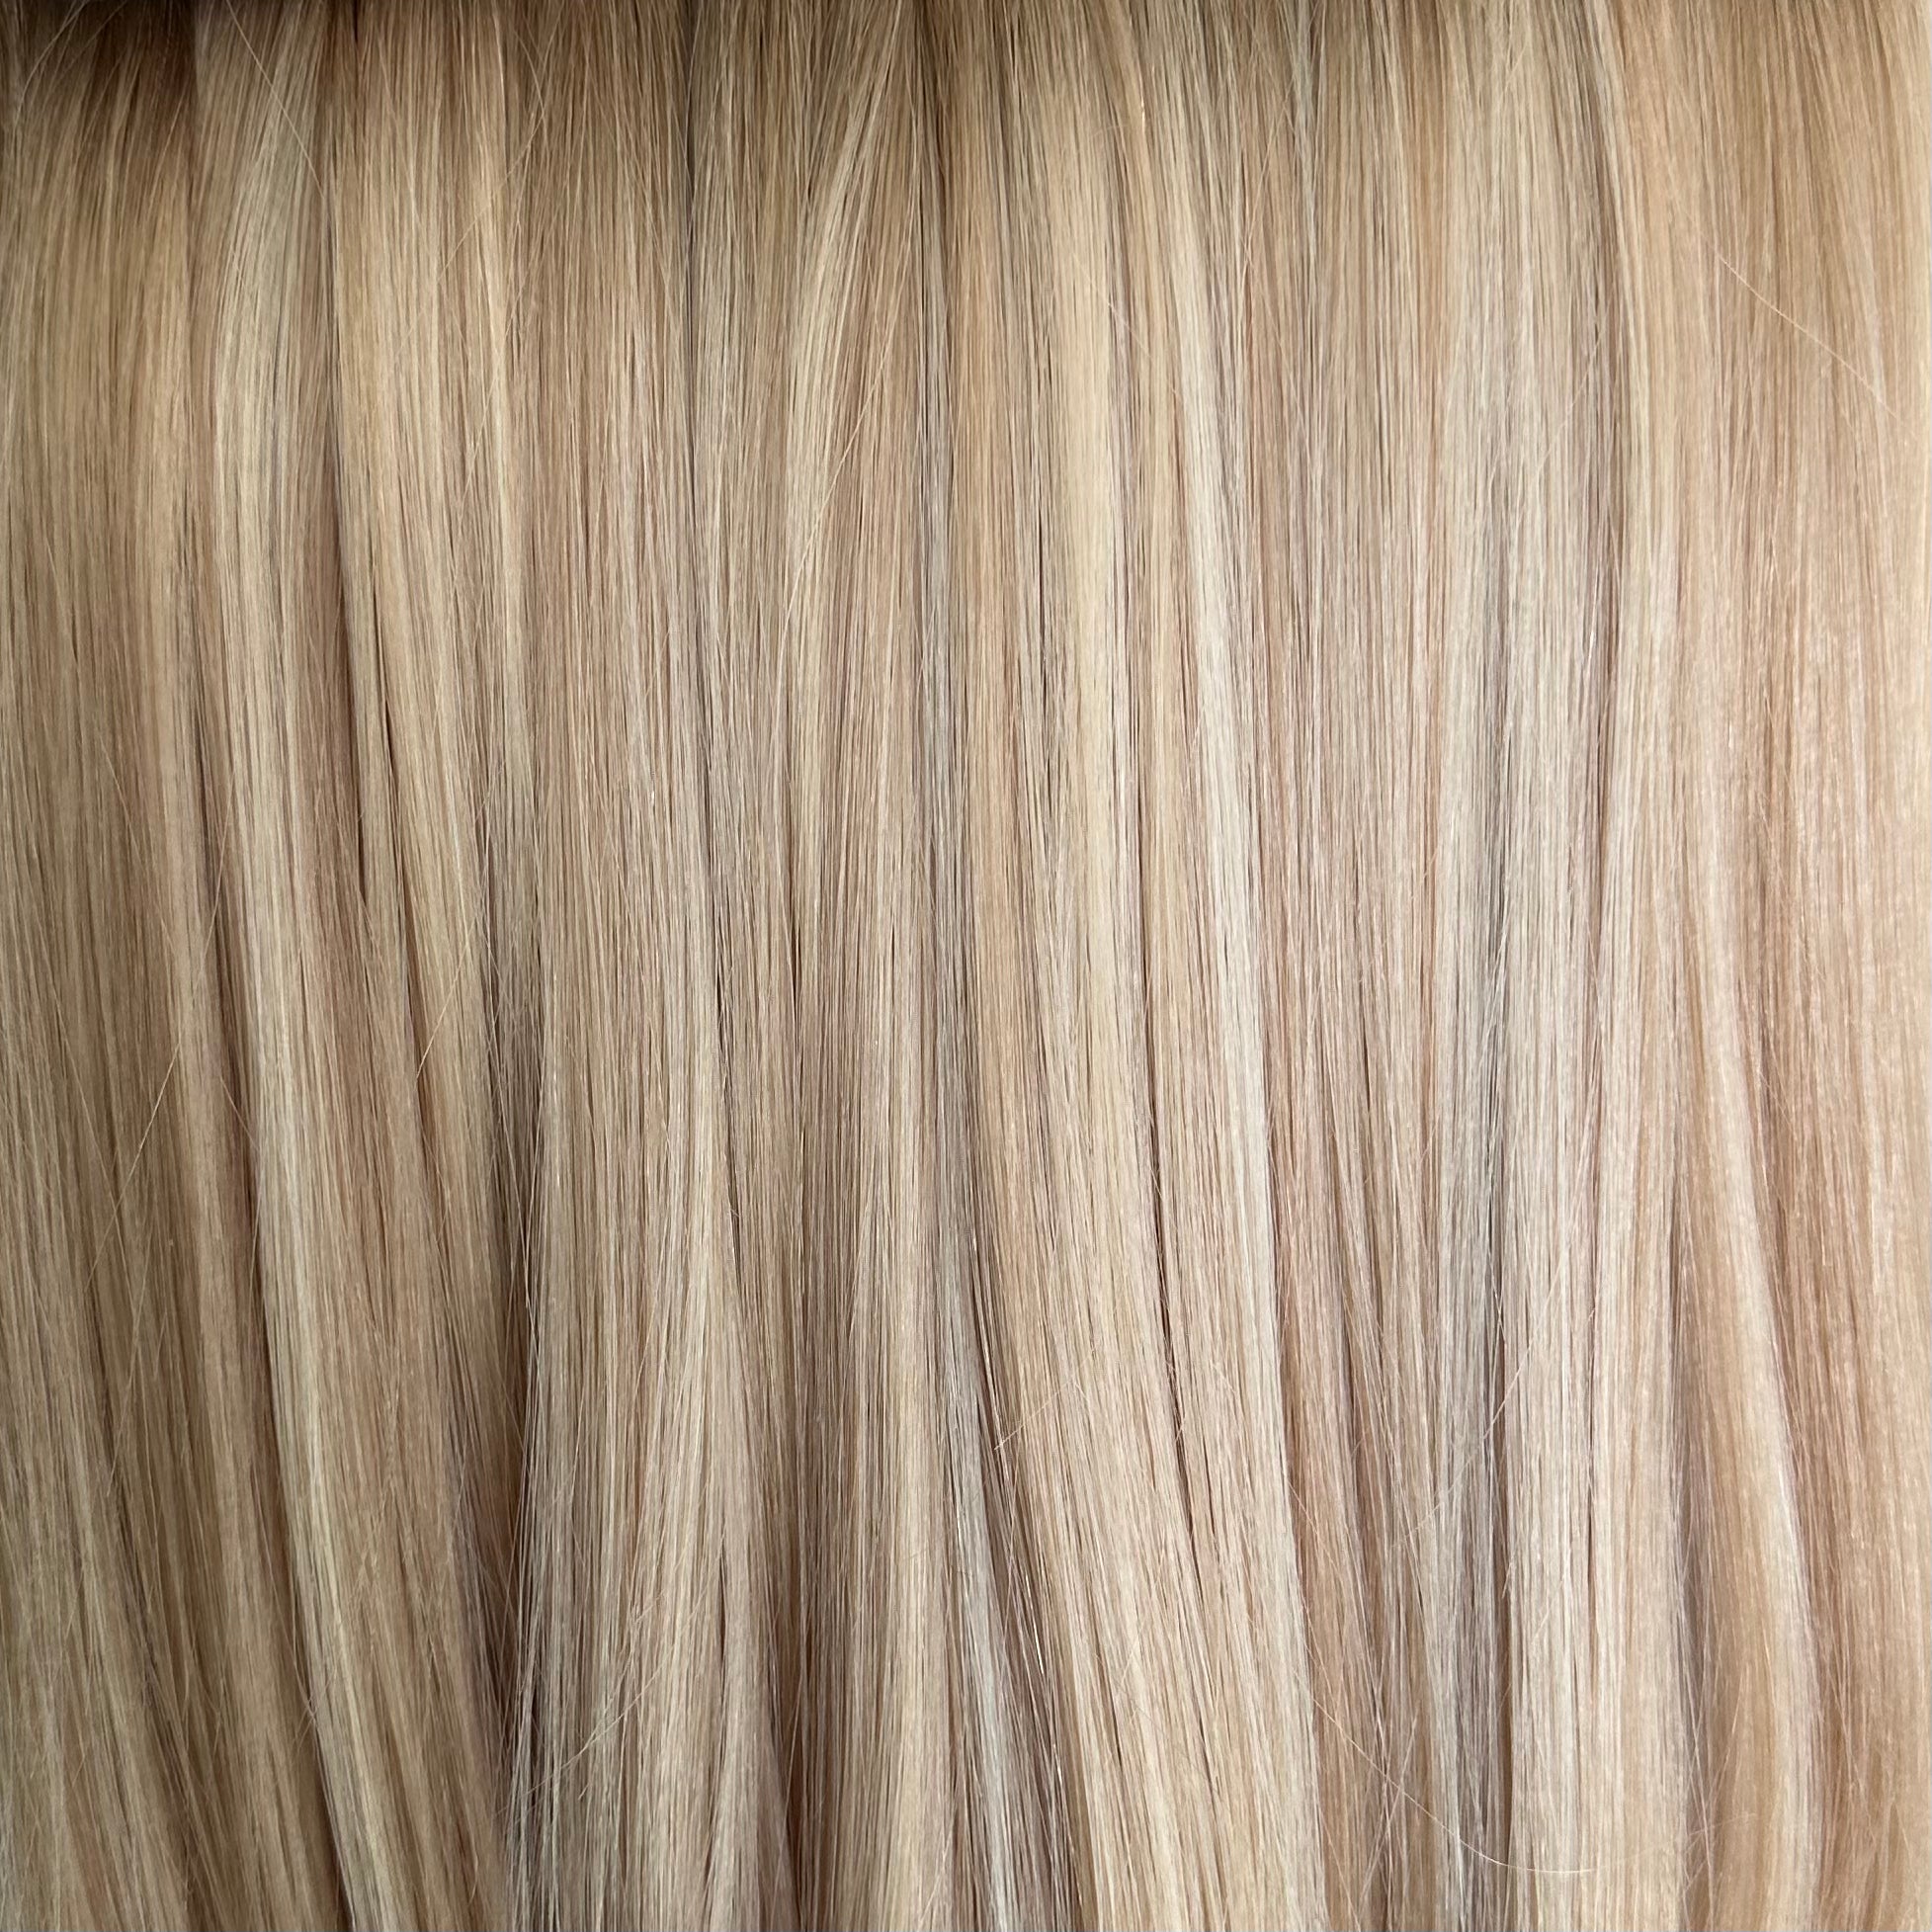 Rooted Sunkissed Blonde - Keratin Flat Tips